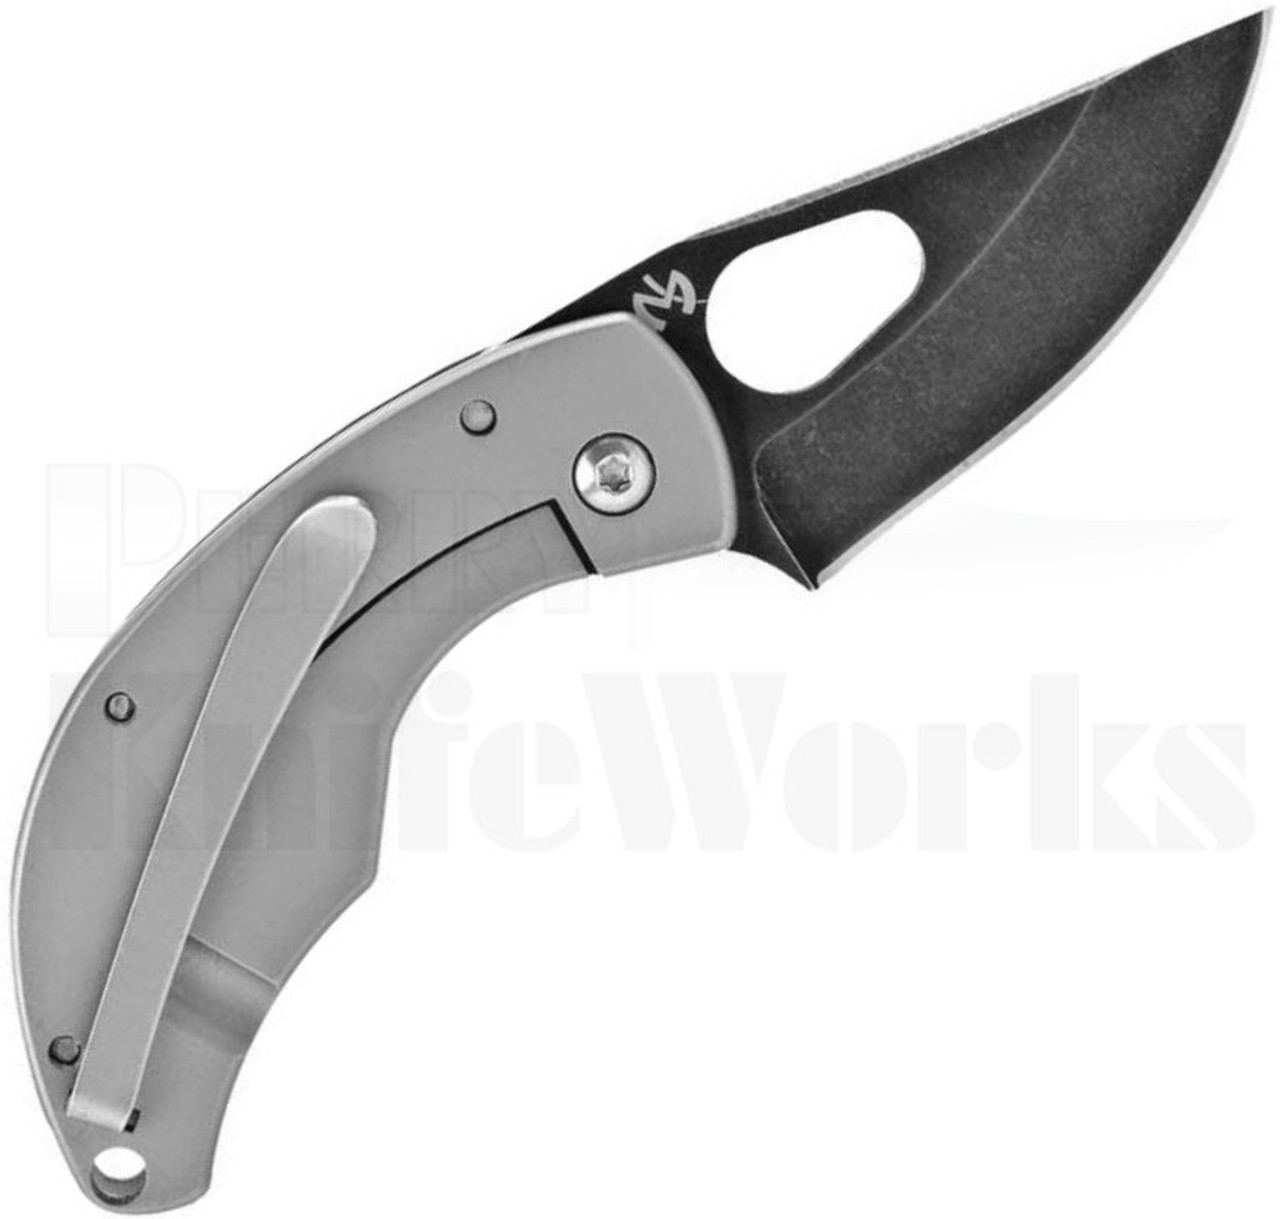 Fred Perrin Le Nano Framelock Knife Limited Edition